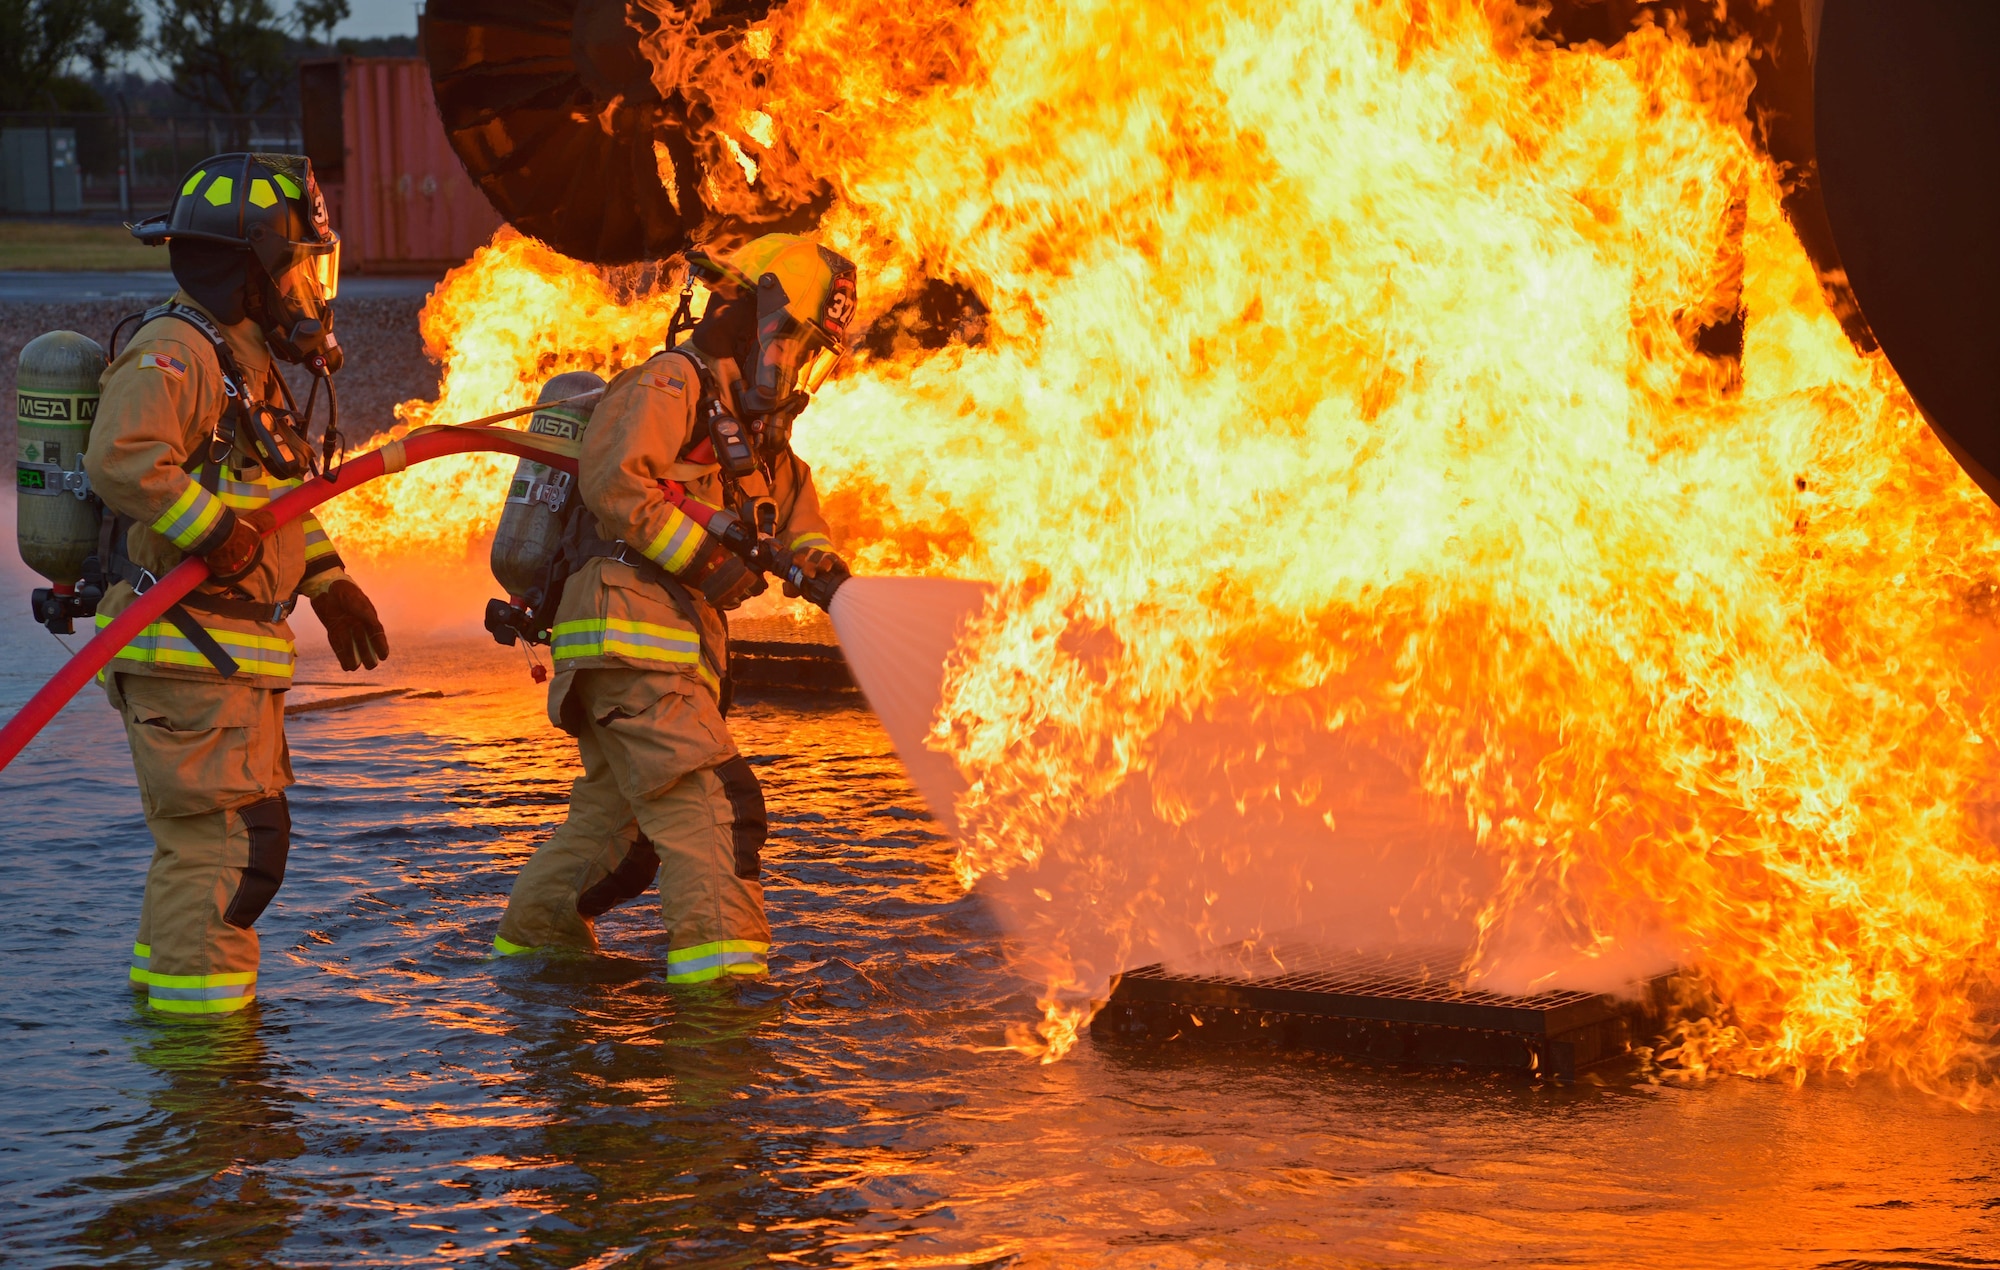 Two firefighters with the 374th Civil Engineer Squadron put out a simulated aircraft fire during a training scenario at Yokota Air Base, Japan, Dec. 14, 2016. The training consisted of a training aircraft burning with two engine fires with leaking fuel spreading on the ground to simulate an aircraft on the runway needing assistance. (U.S. Air Force photo by Staff Sgt. David Owsianka)